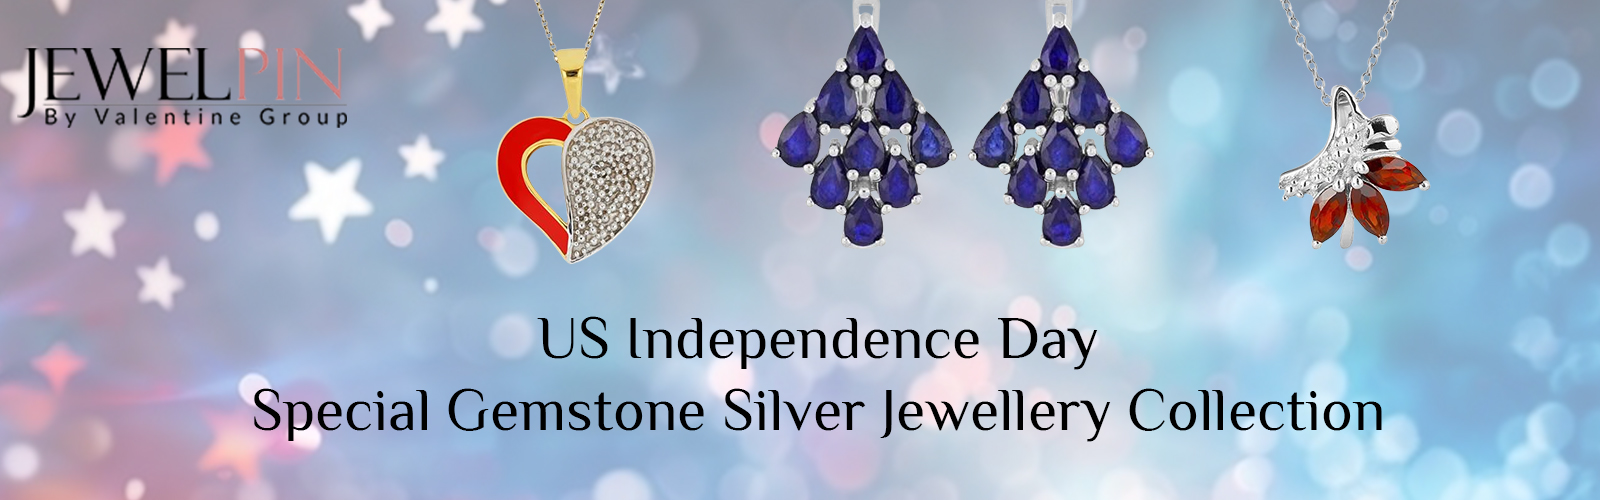 us independence day special gemstone silver jewellery collection